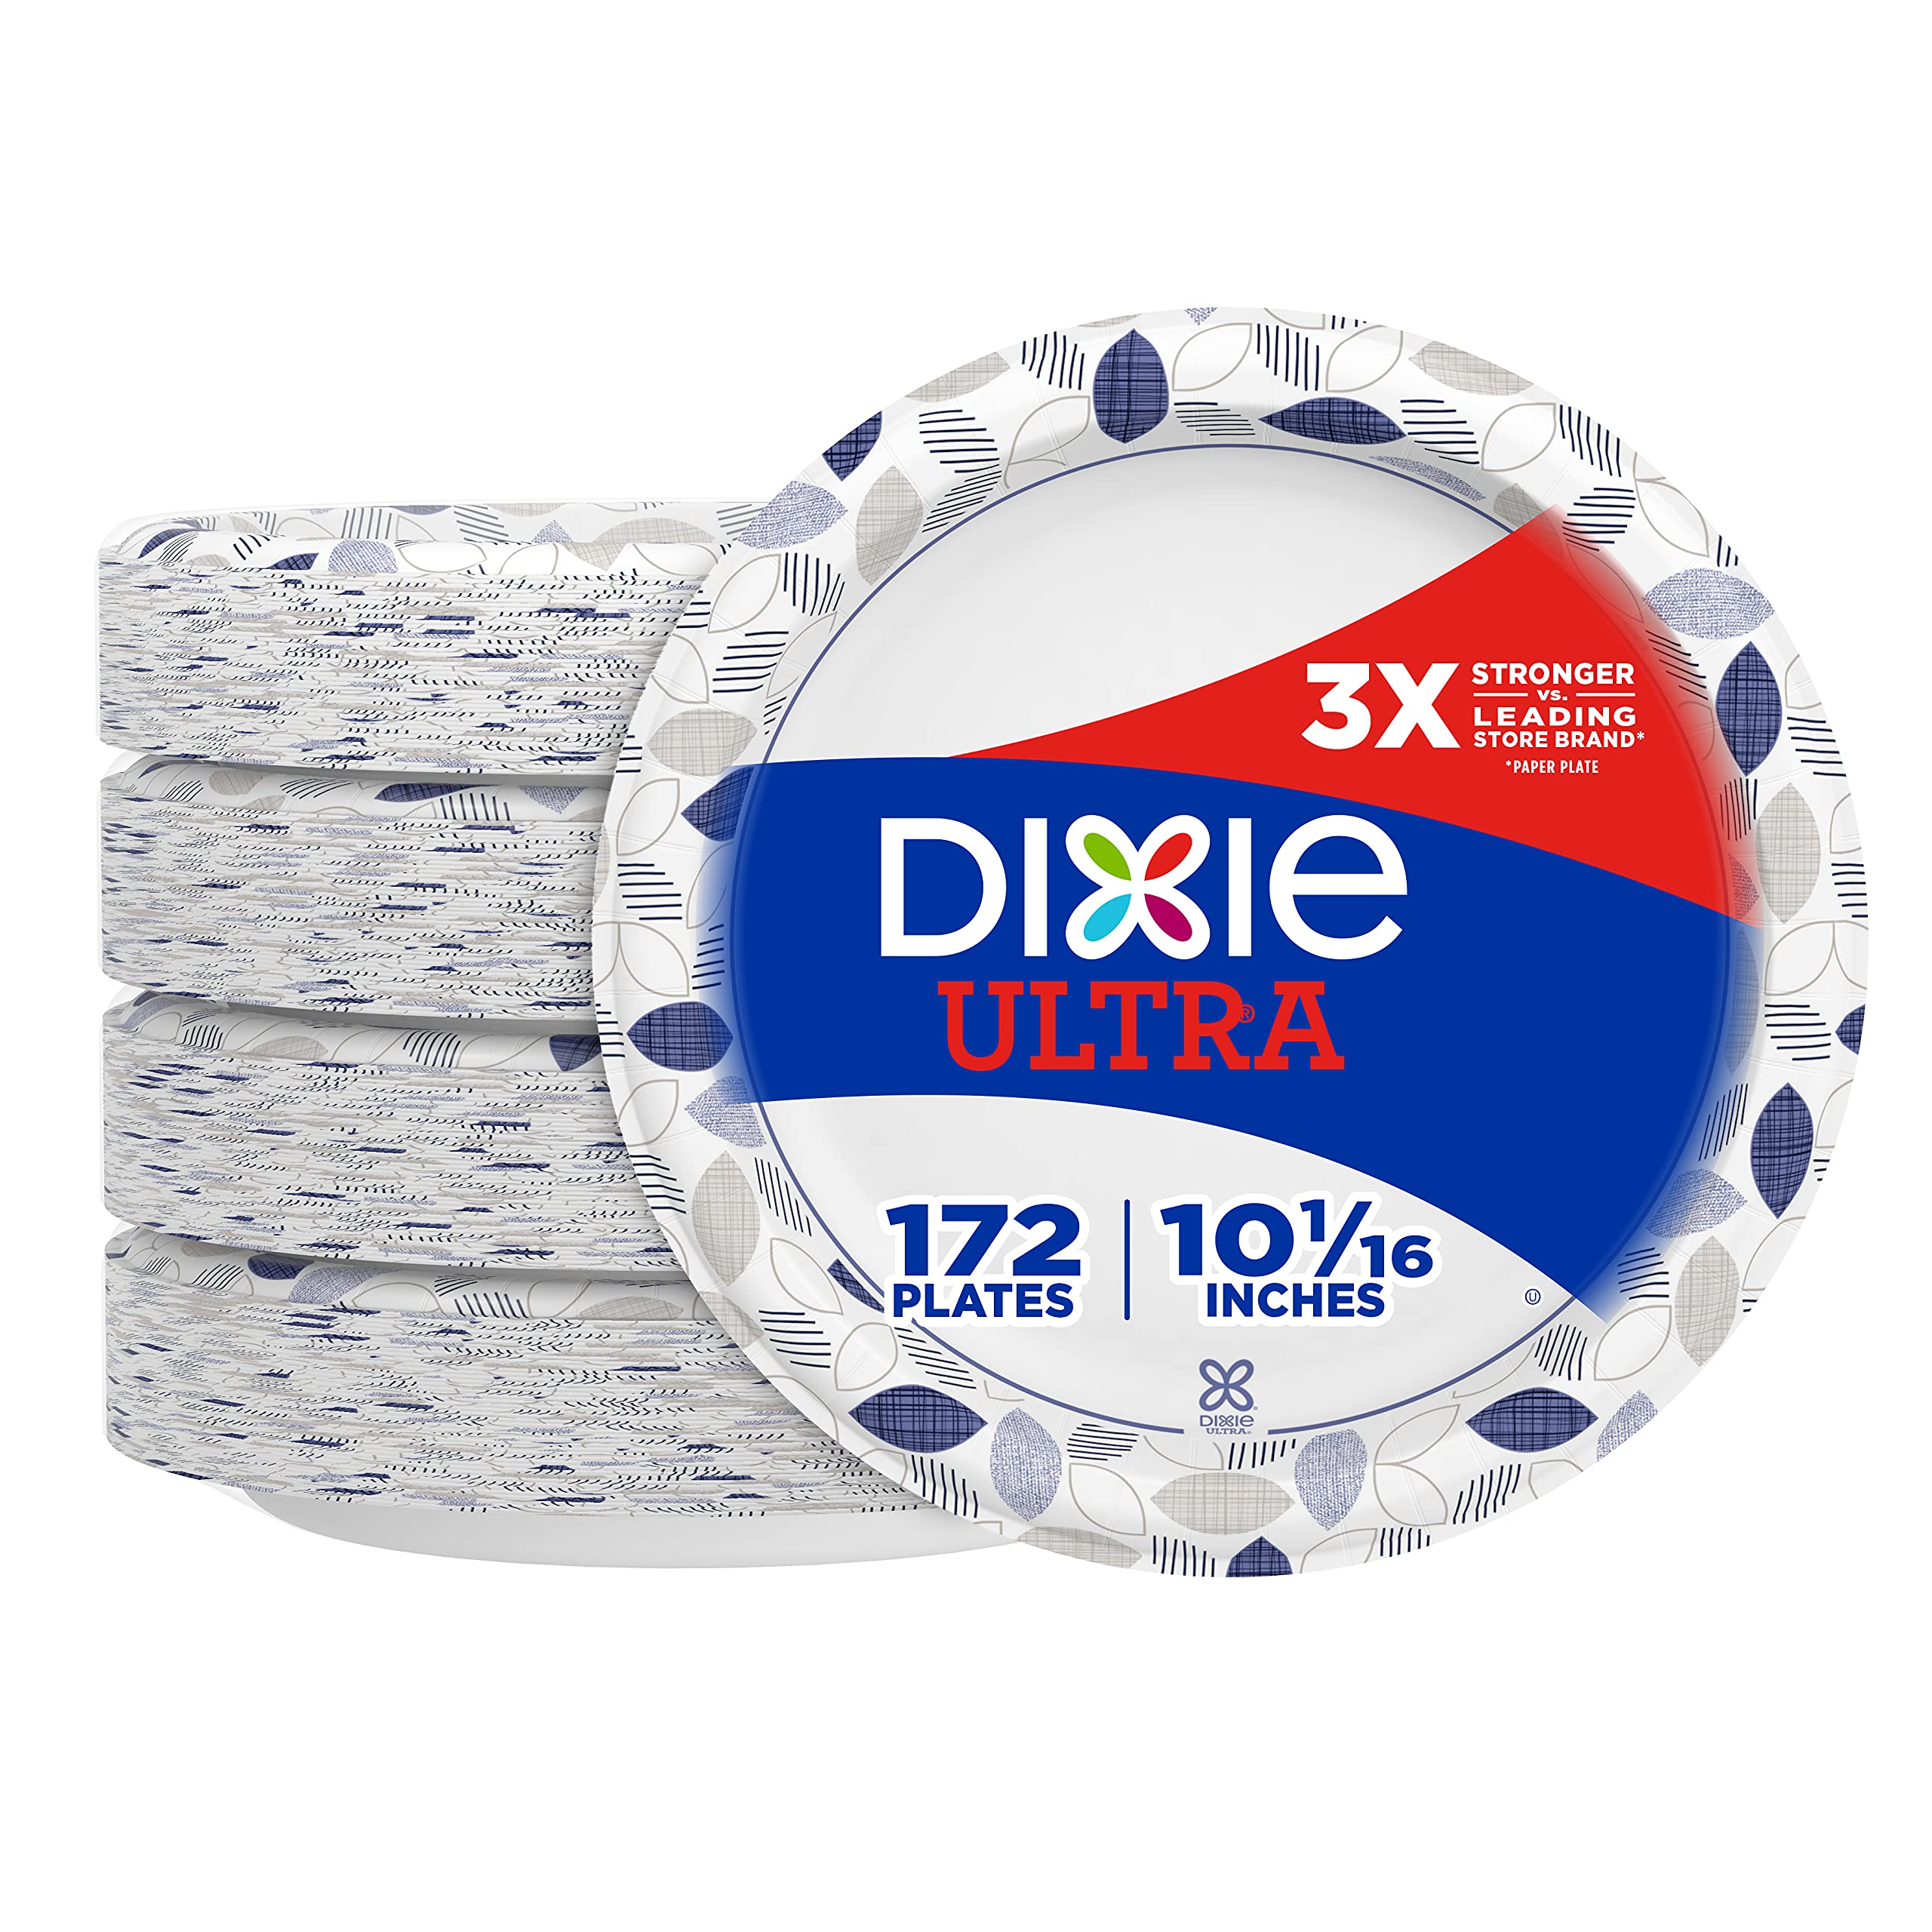 Dixie Ultra Paper Plates, 10 1/16 inch, Dinner Size Printed